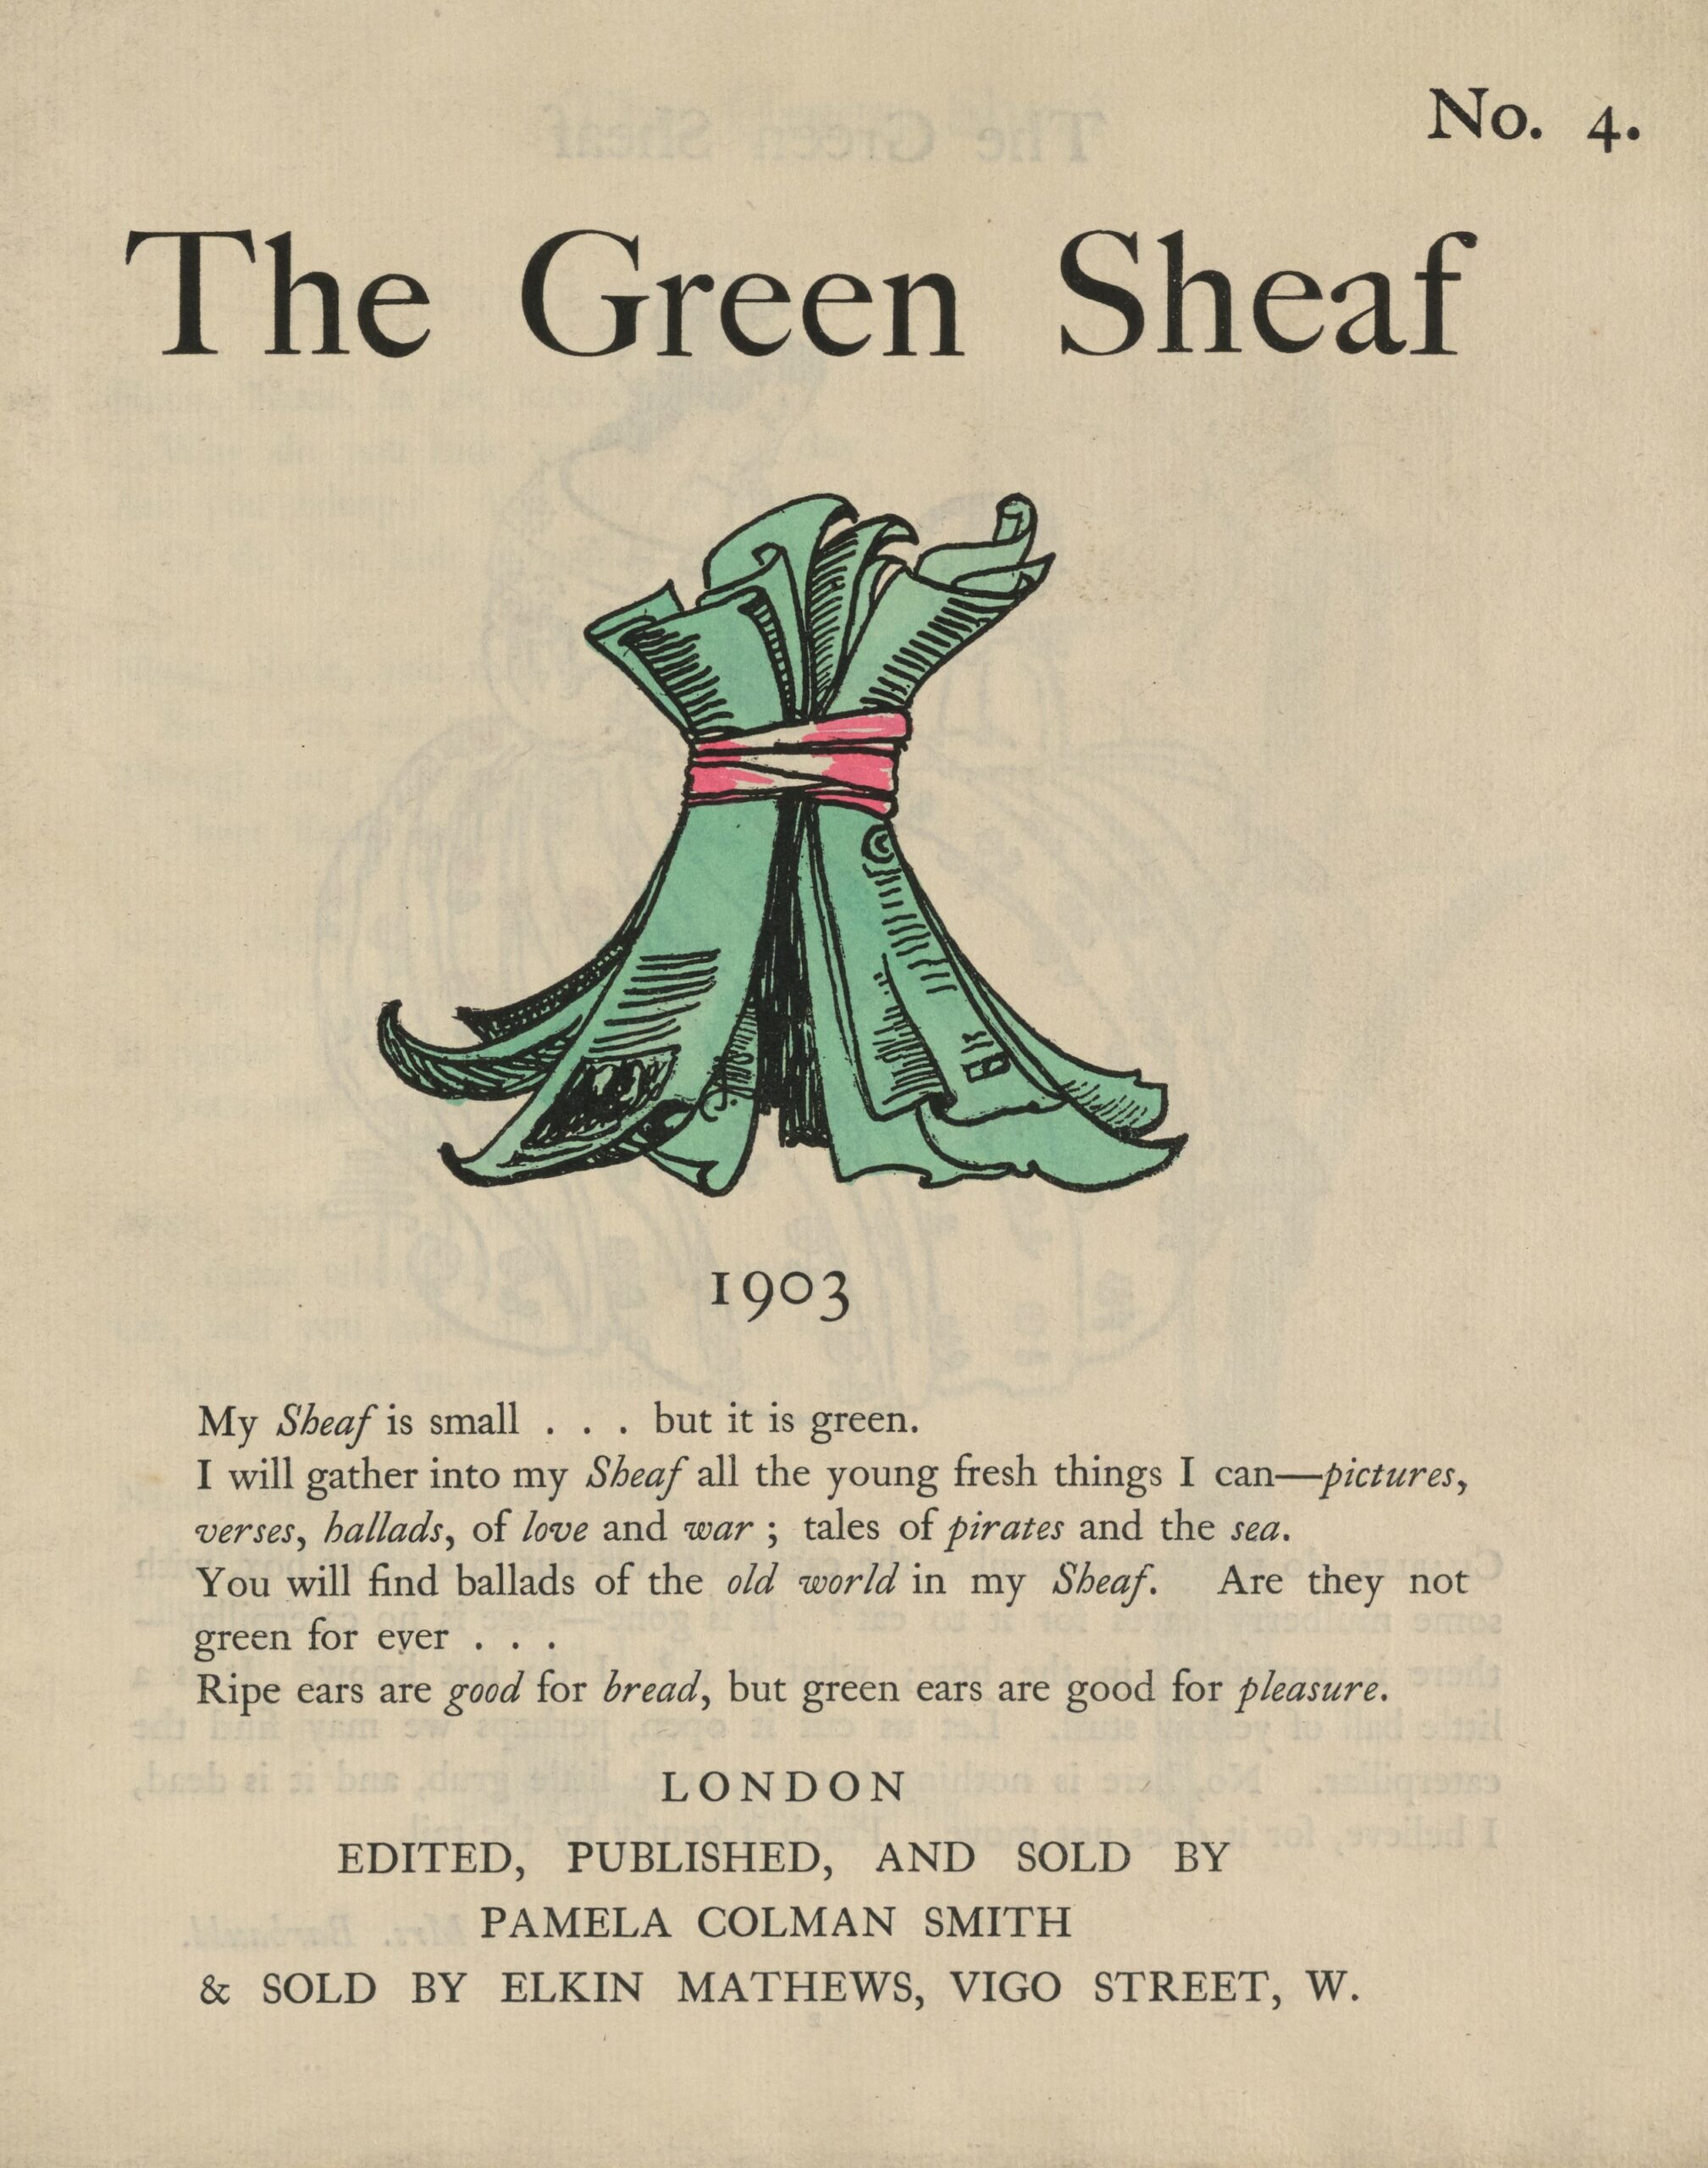  Pamela Colman Smith, Front Cover of The Green Sheaf No. 4, 1903                    